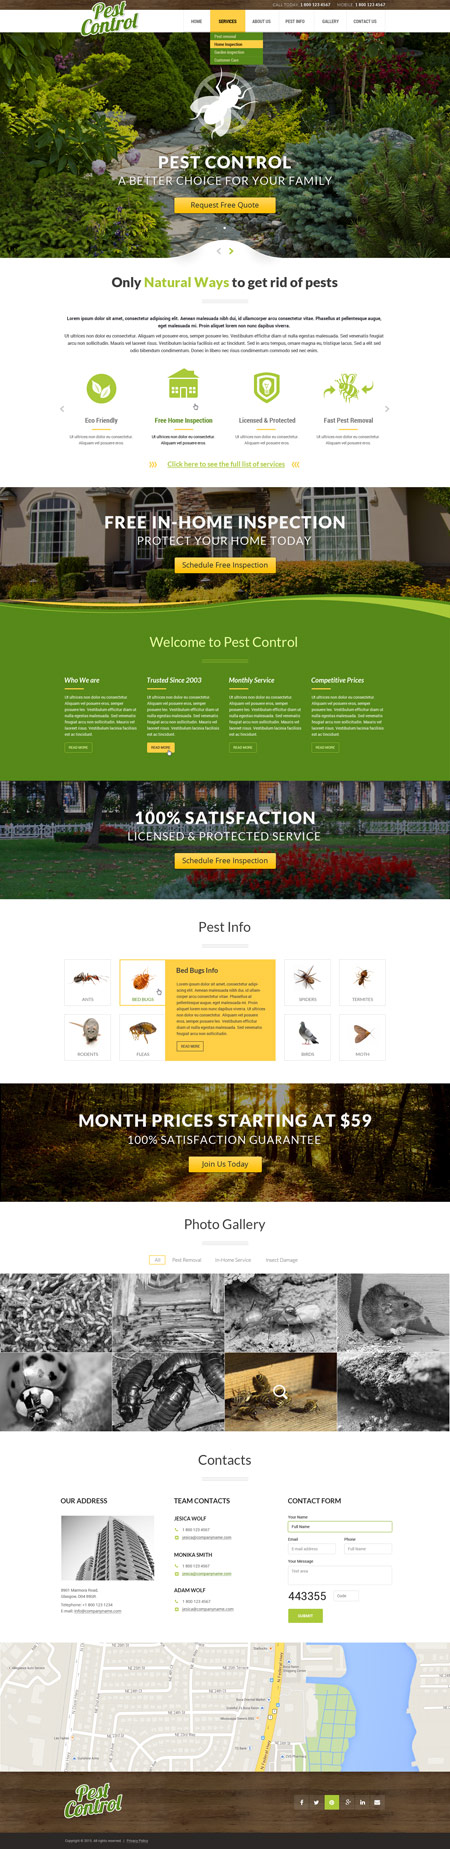 Pest control paralax mobile responsive bootstrap template